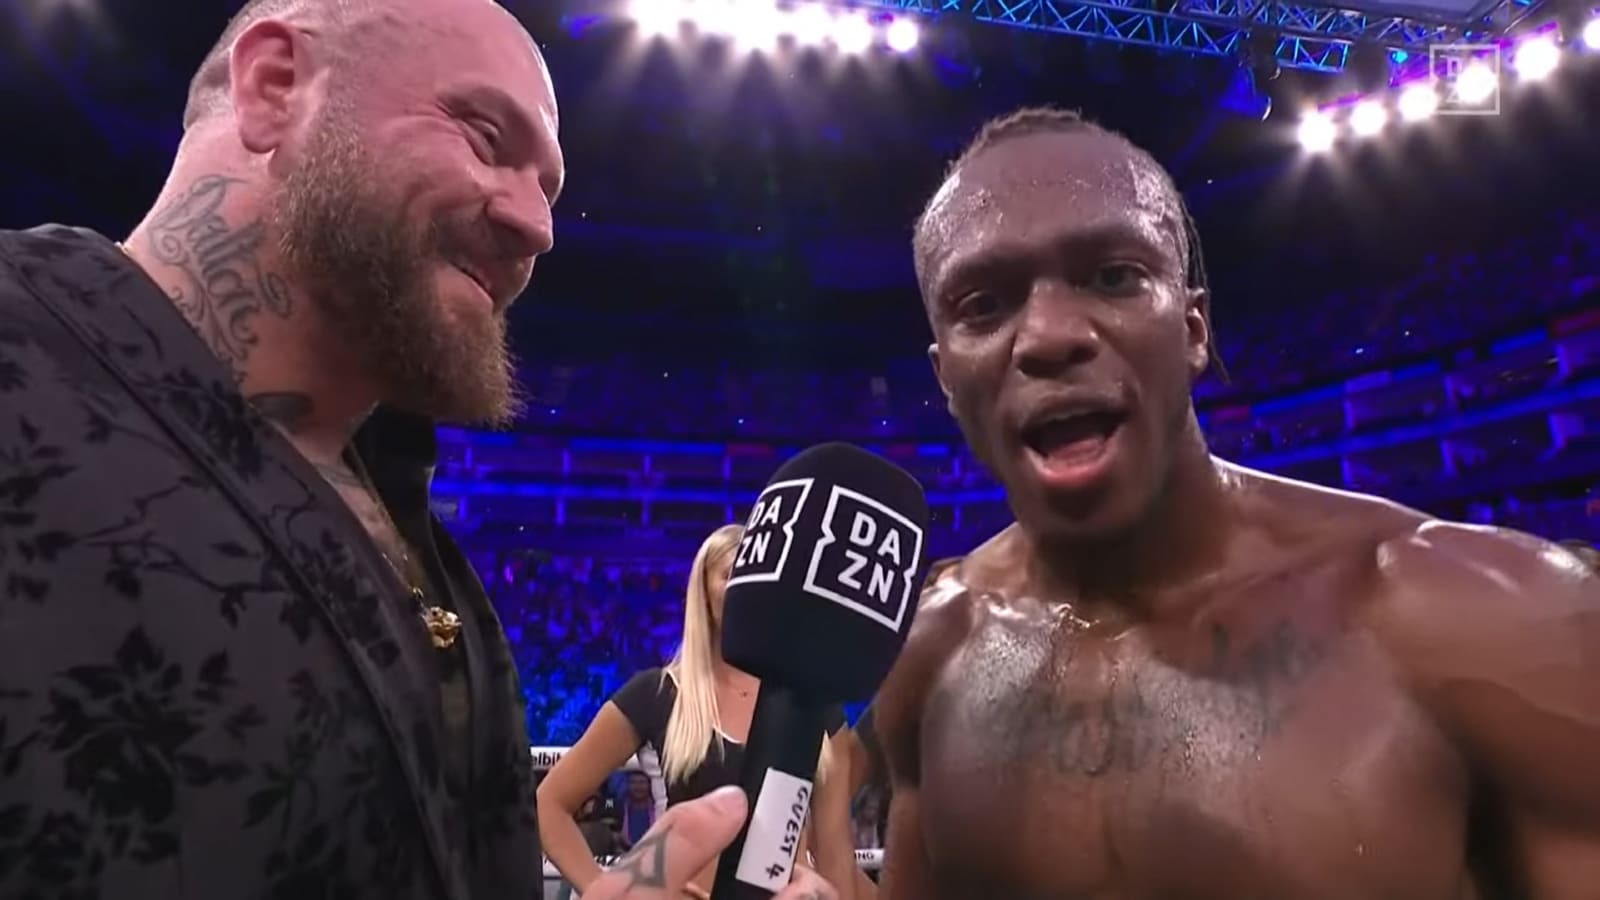 KSI challenges Andrew Tate and Tommy Fury after dominating Swarmz and Pineda